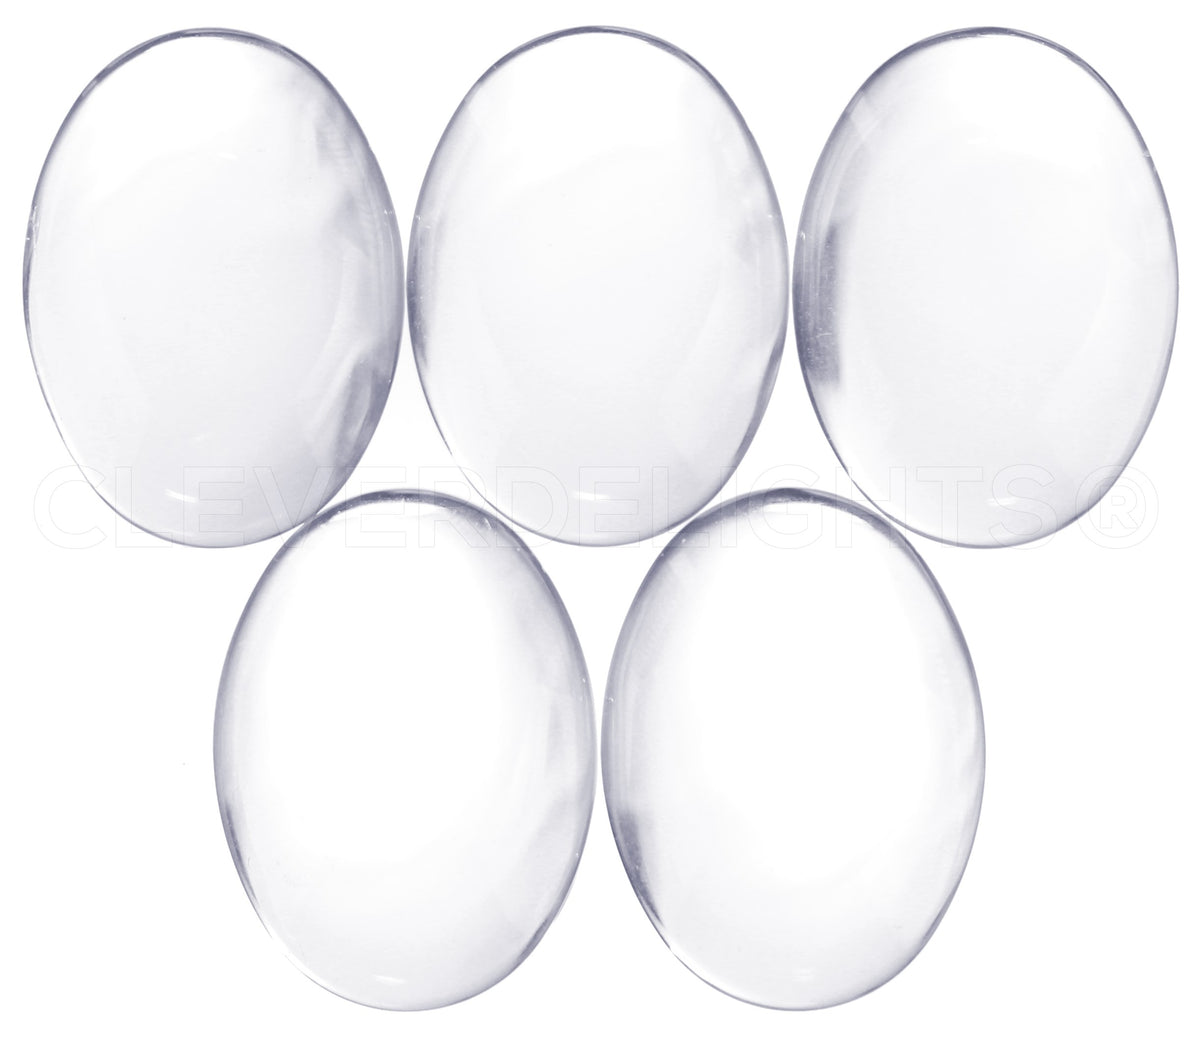 CleverDelights 35mm (1 3/8 inch) Round Glass Cabochons - 25 Pack, Adult Unisex, Size: 35 mm, Clear